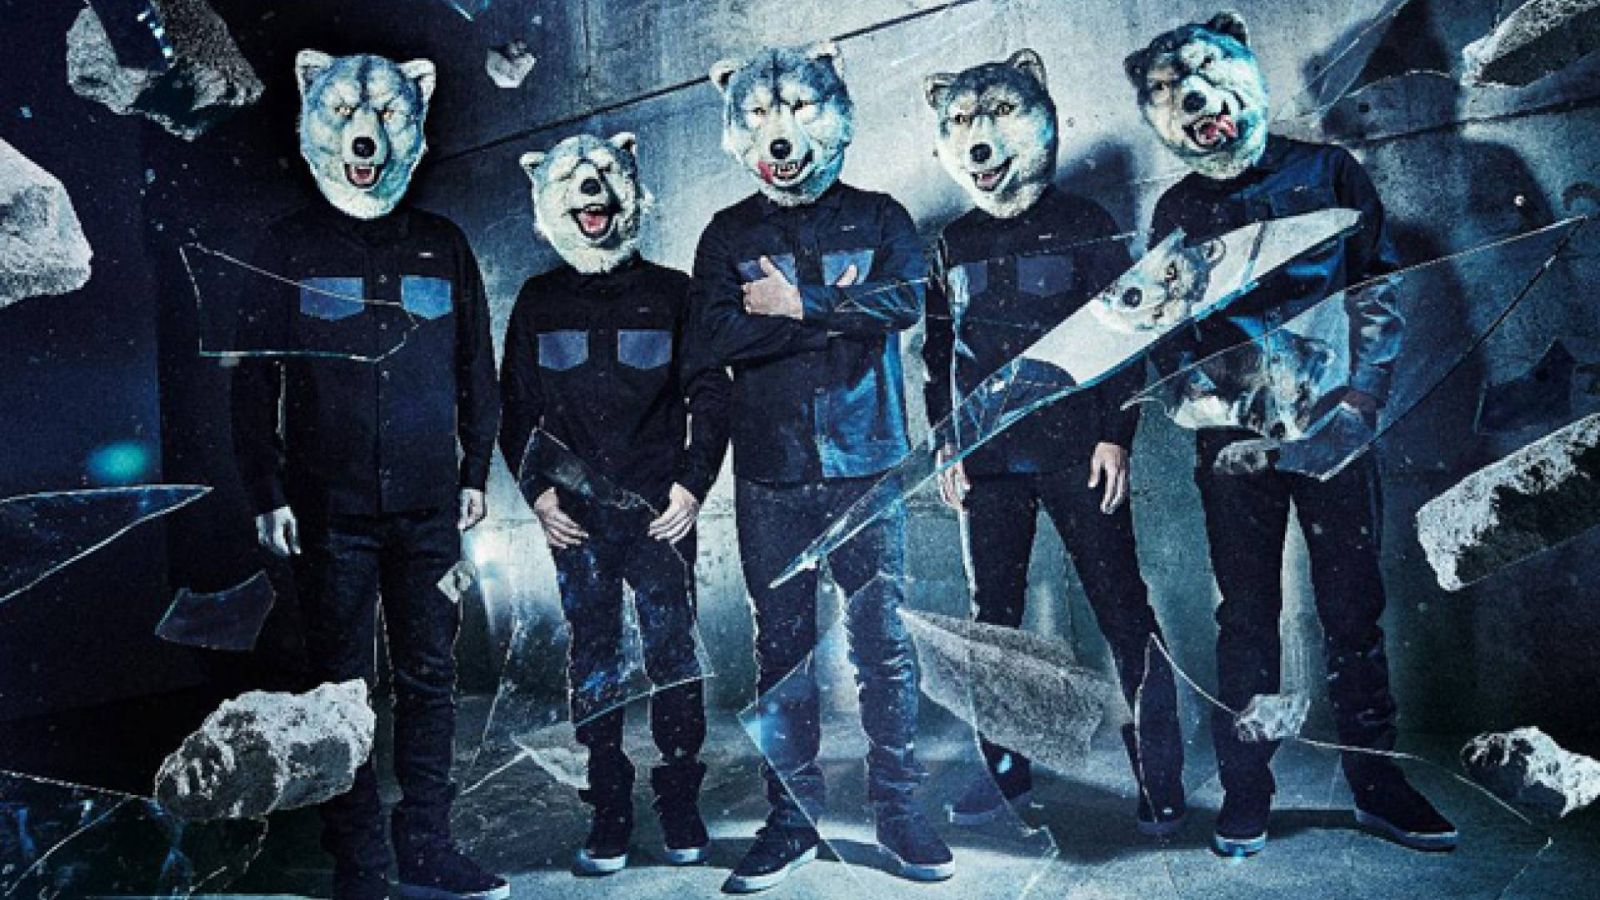 MAN WITH A MISSION to Release a New Single © Sony Music Entertainment (Japan) Inc. All rights reserved.